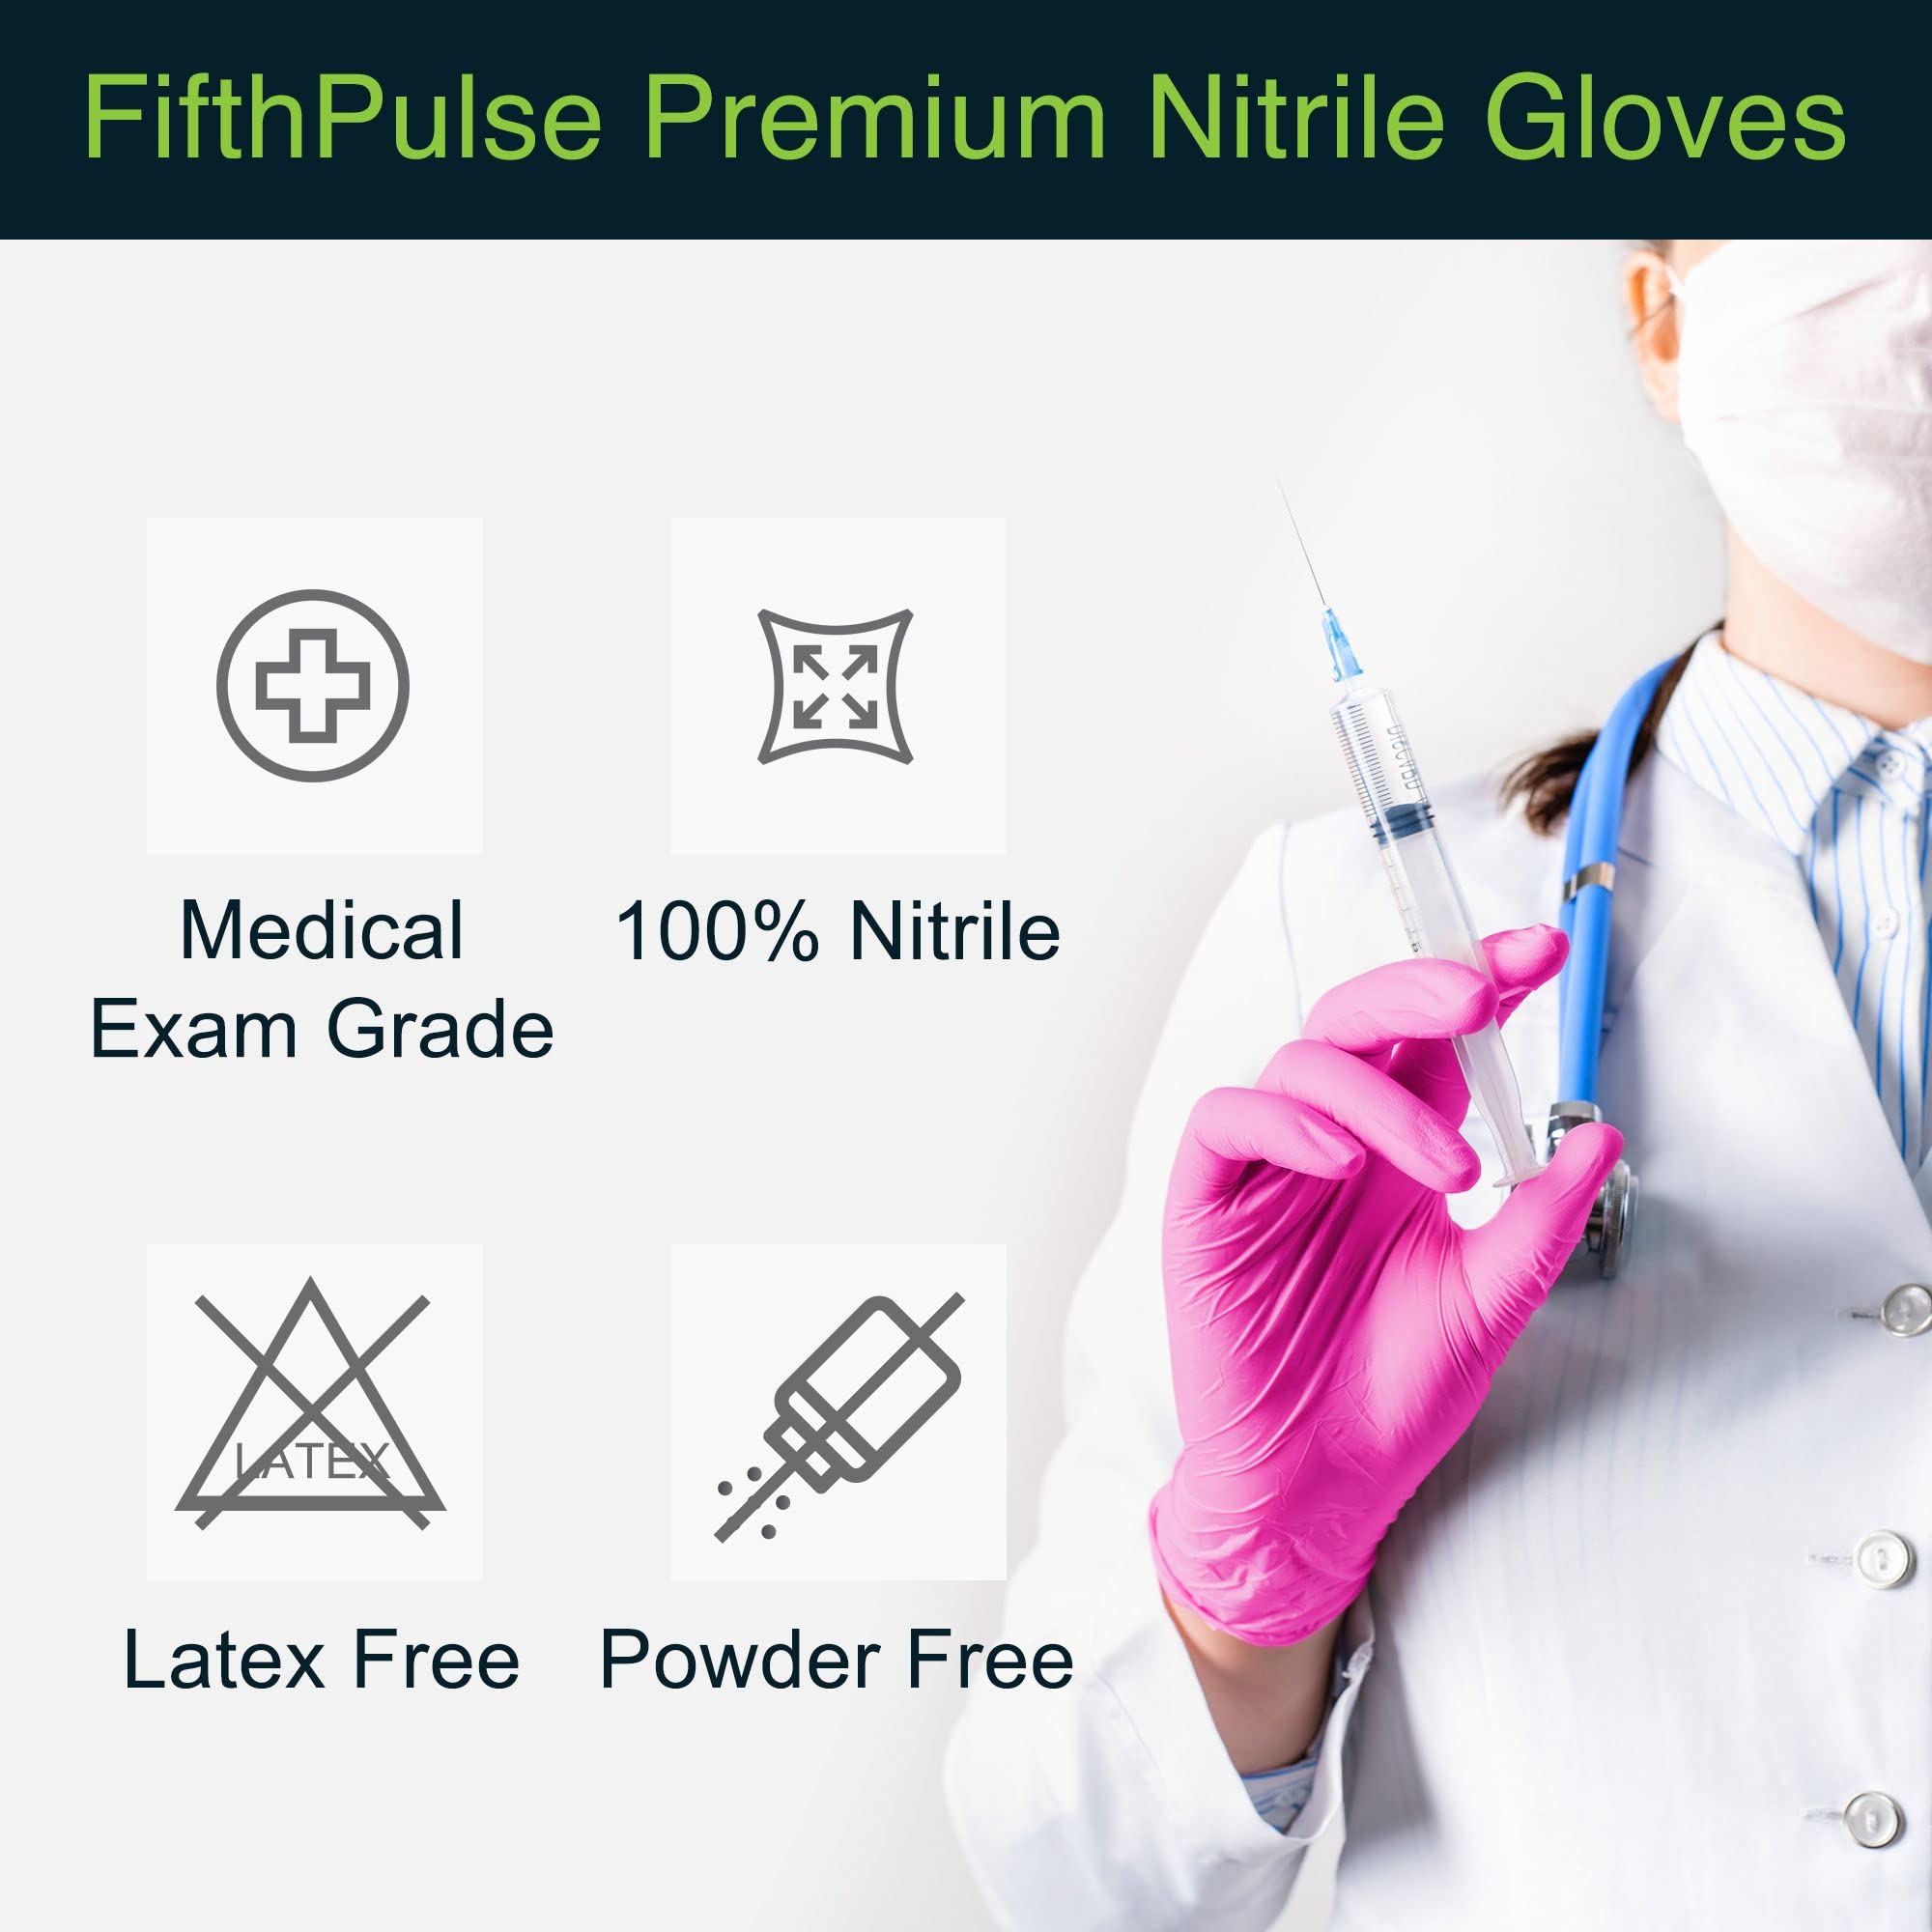 Fuchsia Hot Pink Nitrile Disposable Gloves - 50 Count - 3 Mil Nitrile Gloves Small - Powder and Latex Free Rubber Gloves - Surgical Medical Exam Gloves - Food Safe Cooking Gloves